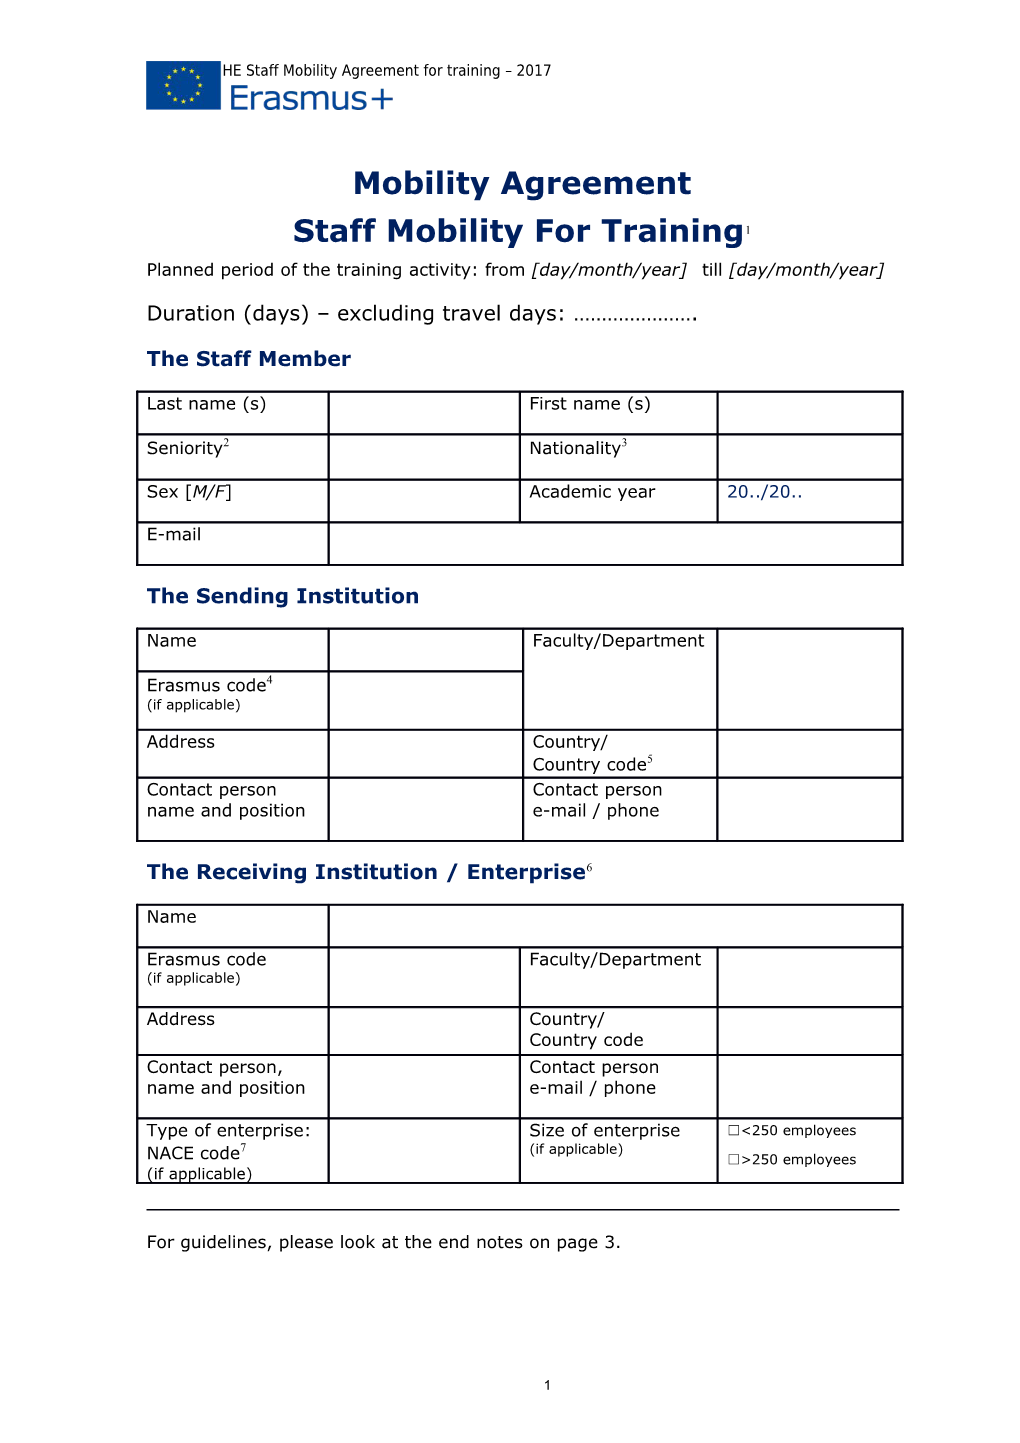 Erasmus+ HE Staff Mobility Agreement for Training 2017